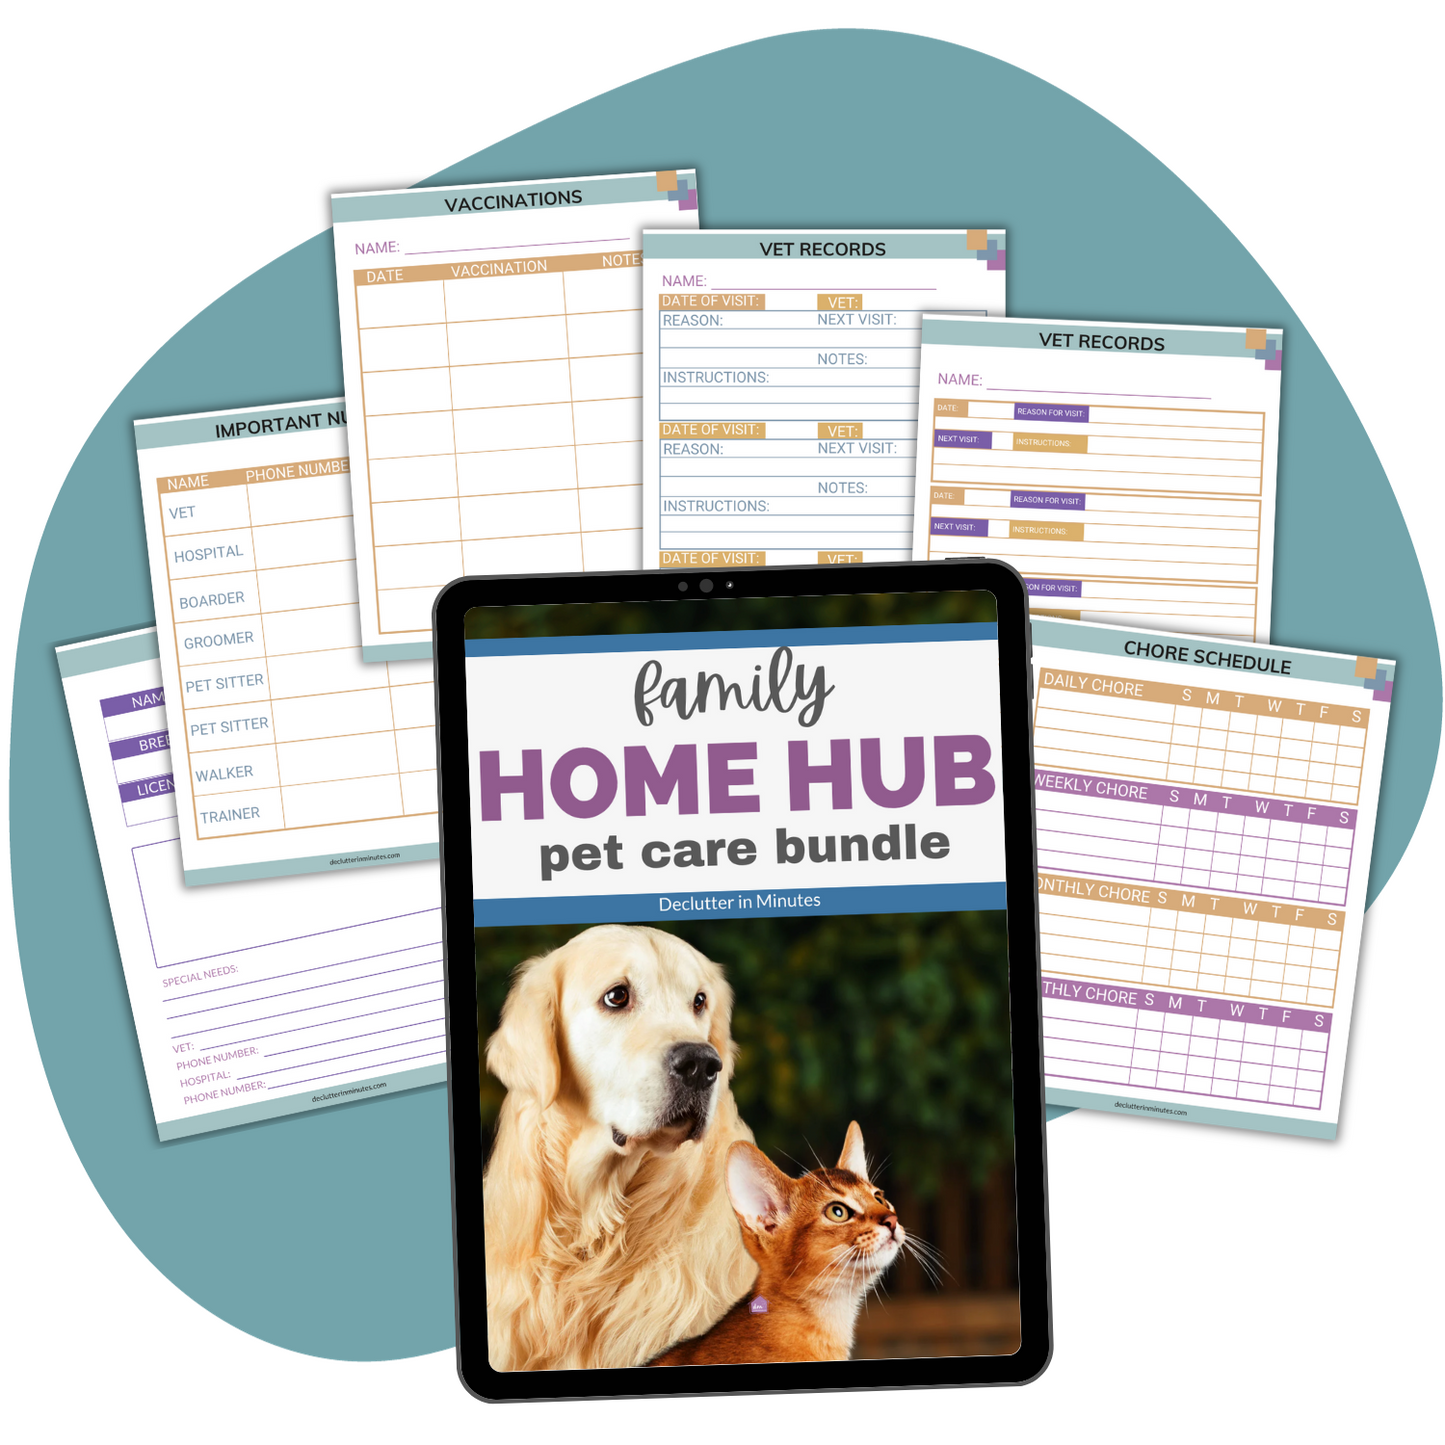 Pet Care Bundle for your Home Hub